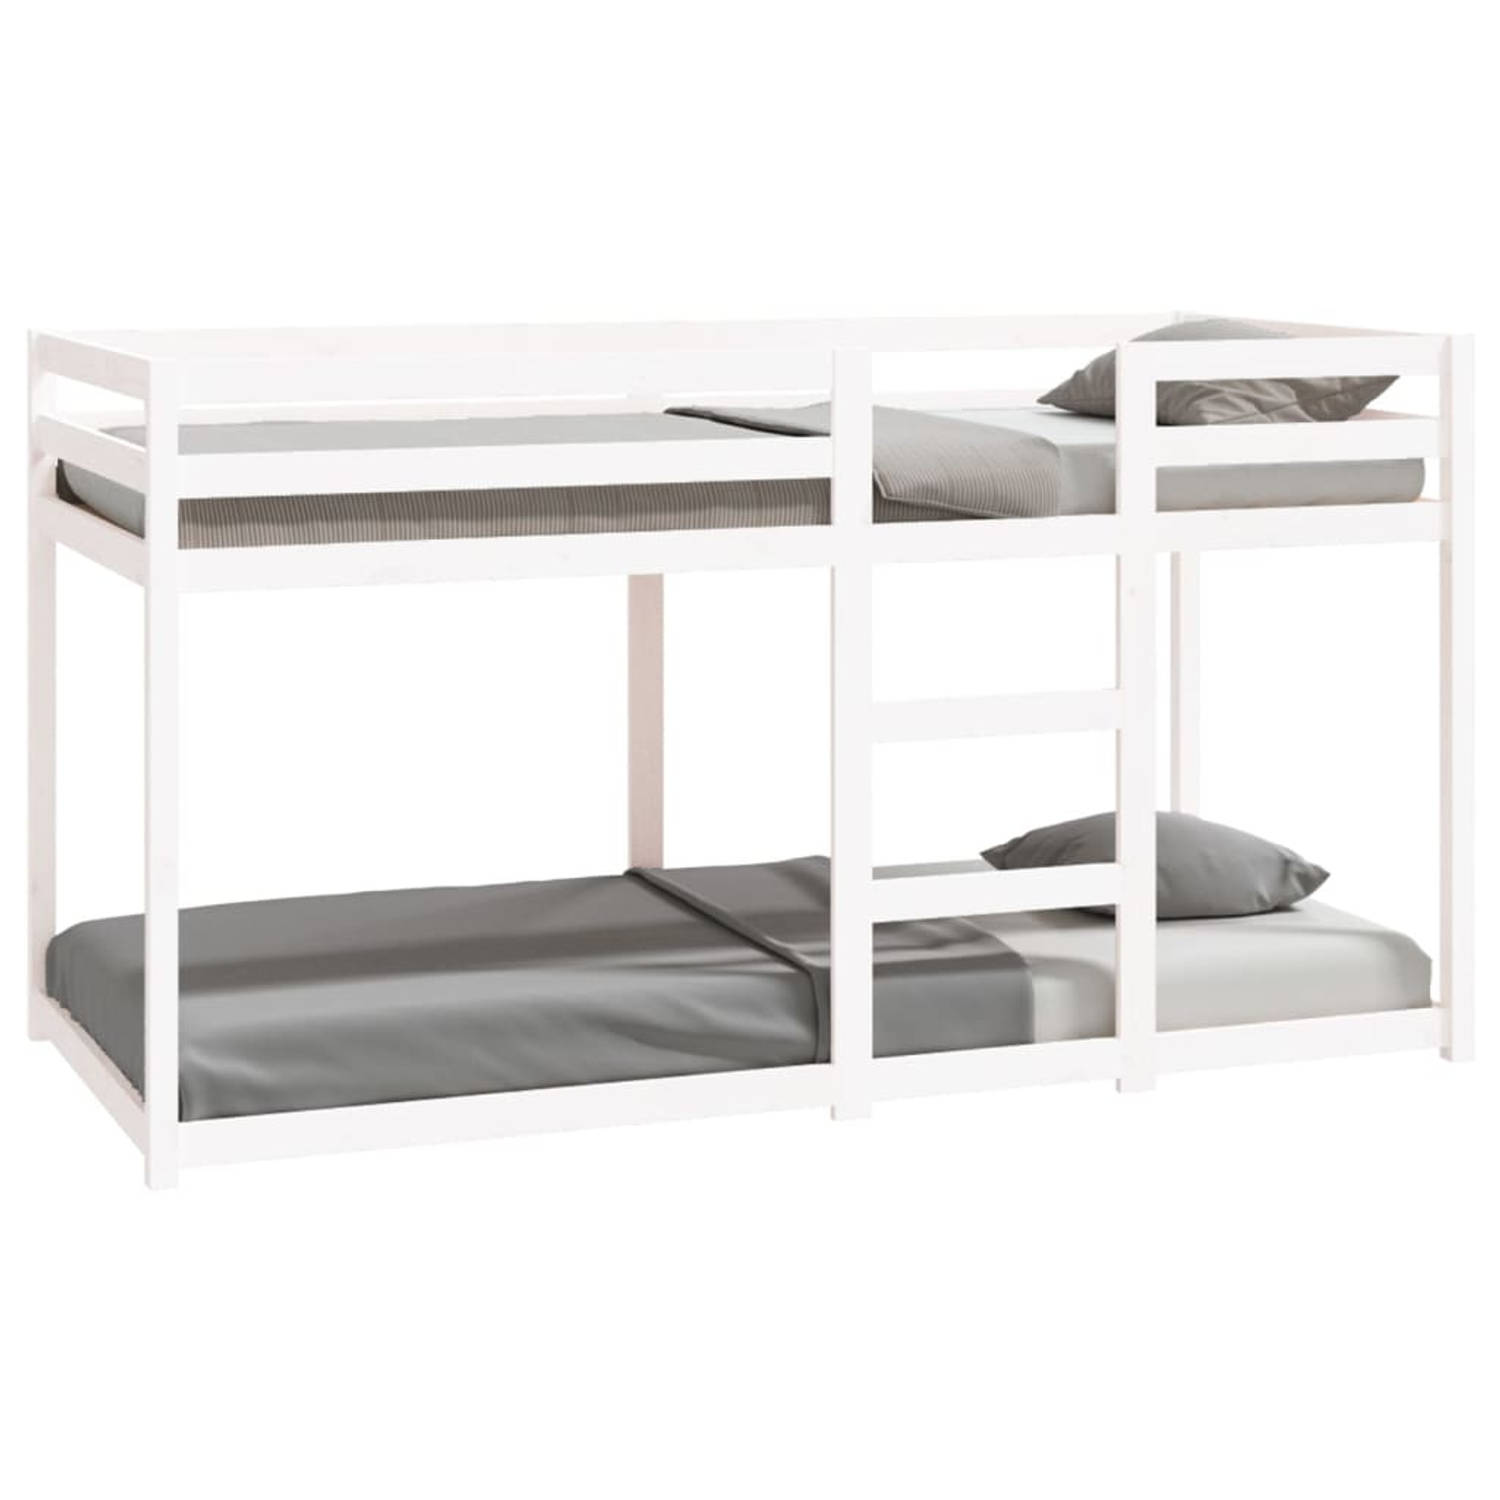 The Living Store Stapelbed massief grenenhout wit 90x200 cm - Stapelbed - Stapelbedden - Bed - Bedframe - Stapelbedframe - Bed Frame - Bedden - Bedframes - Stapelbedframes - Bed Fr